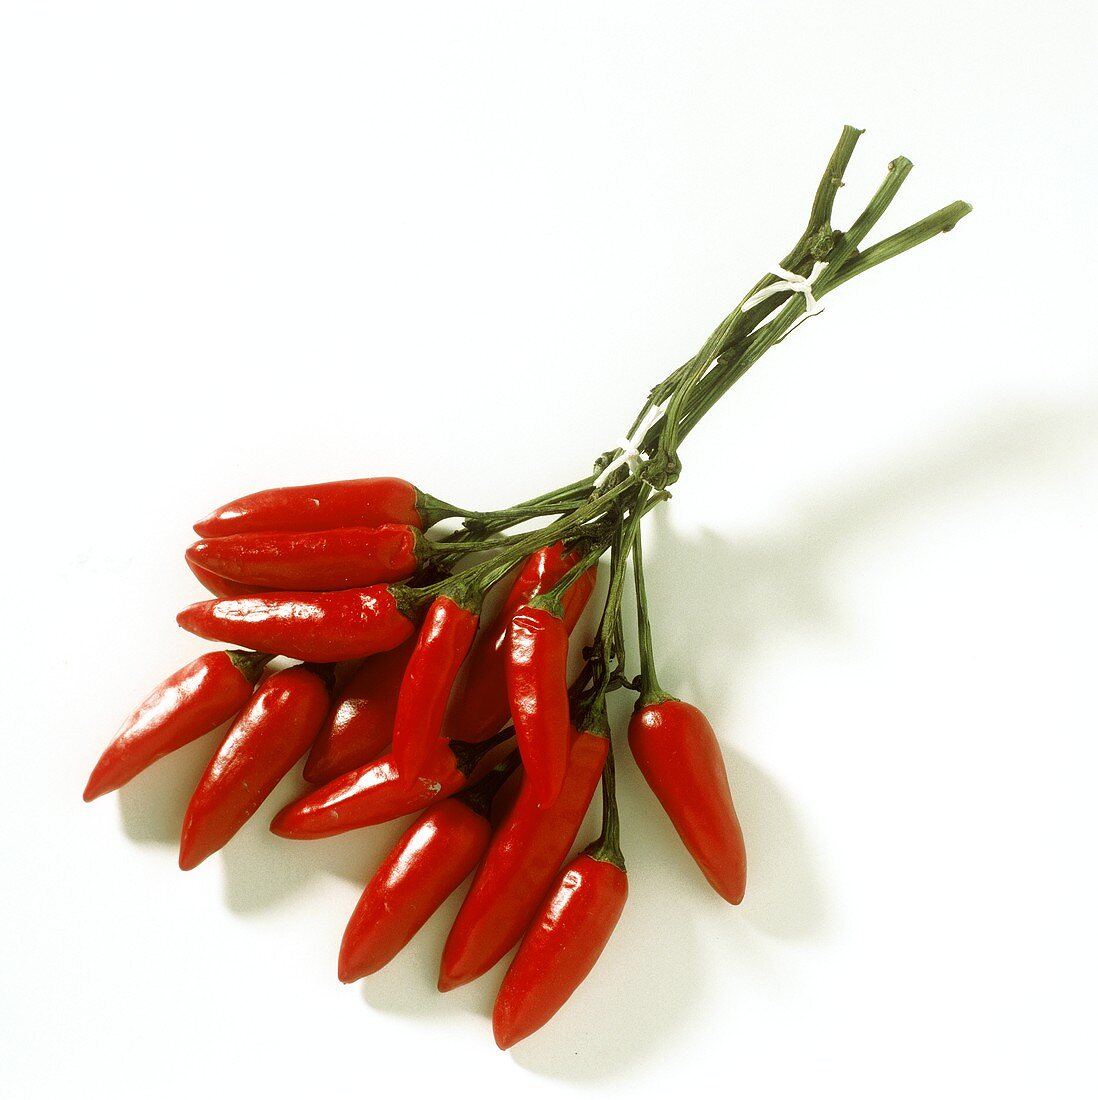 Several Red Chili Peppers